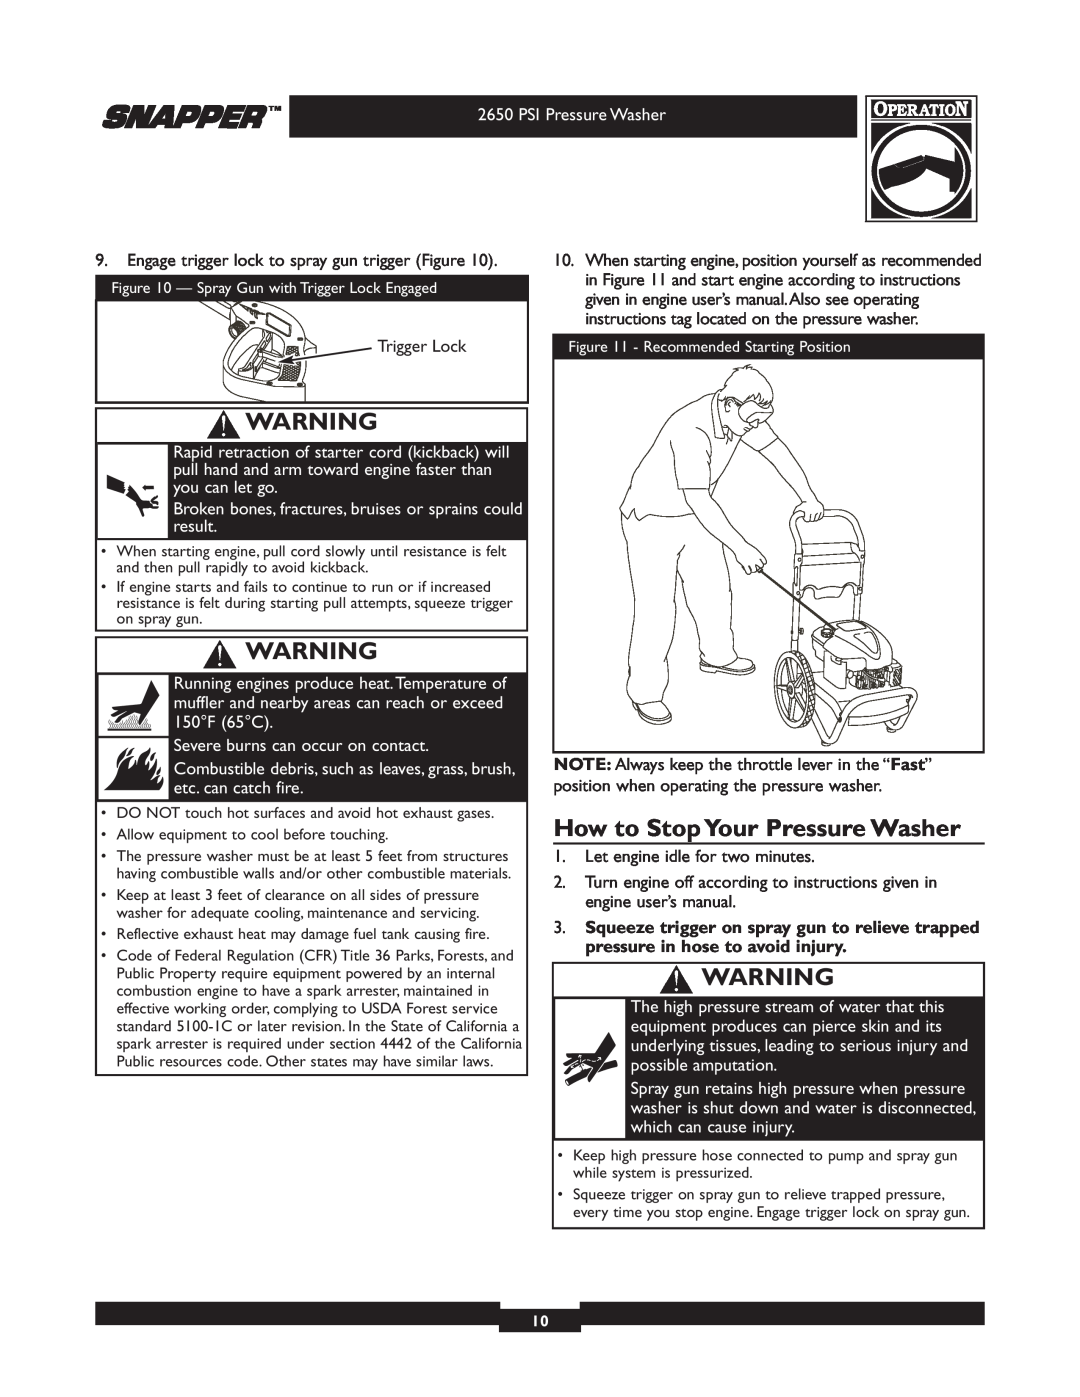 Snapper 020230 user manual How to Stop Your Pressure Washer, Engage trigger lock to spray gun trigger Figure, Trigger Lock 